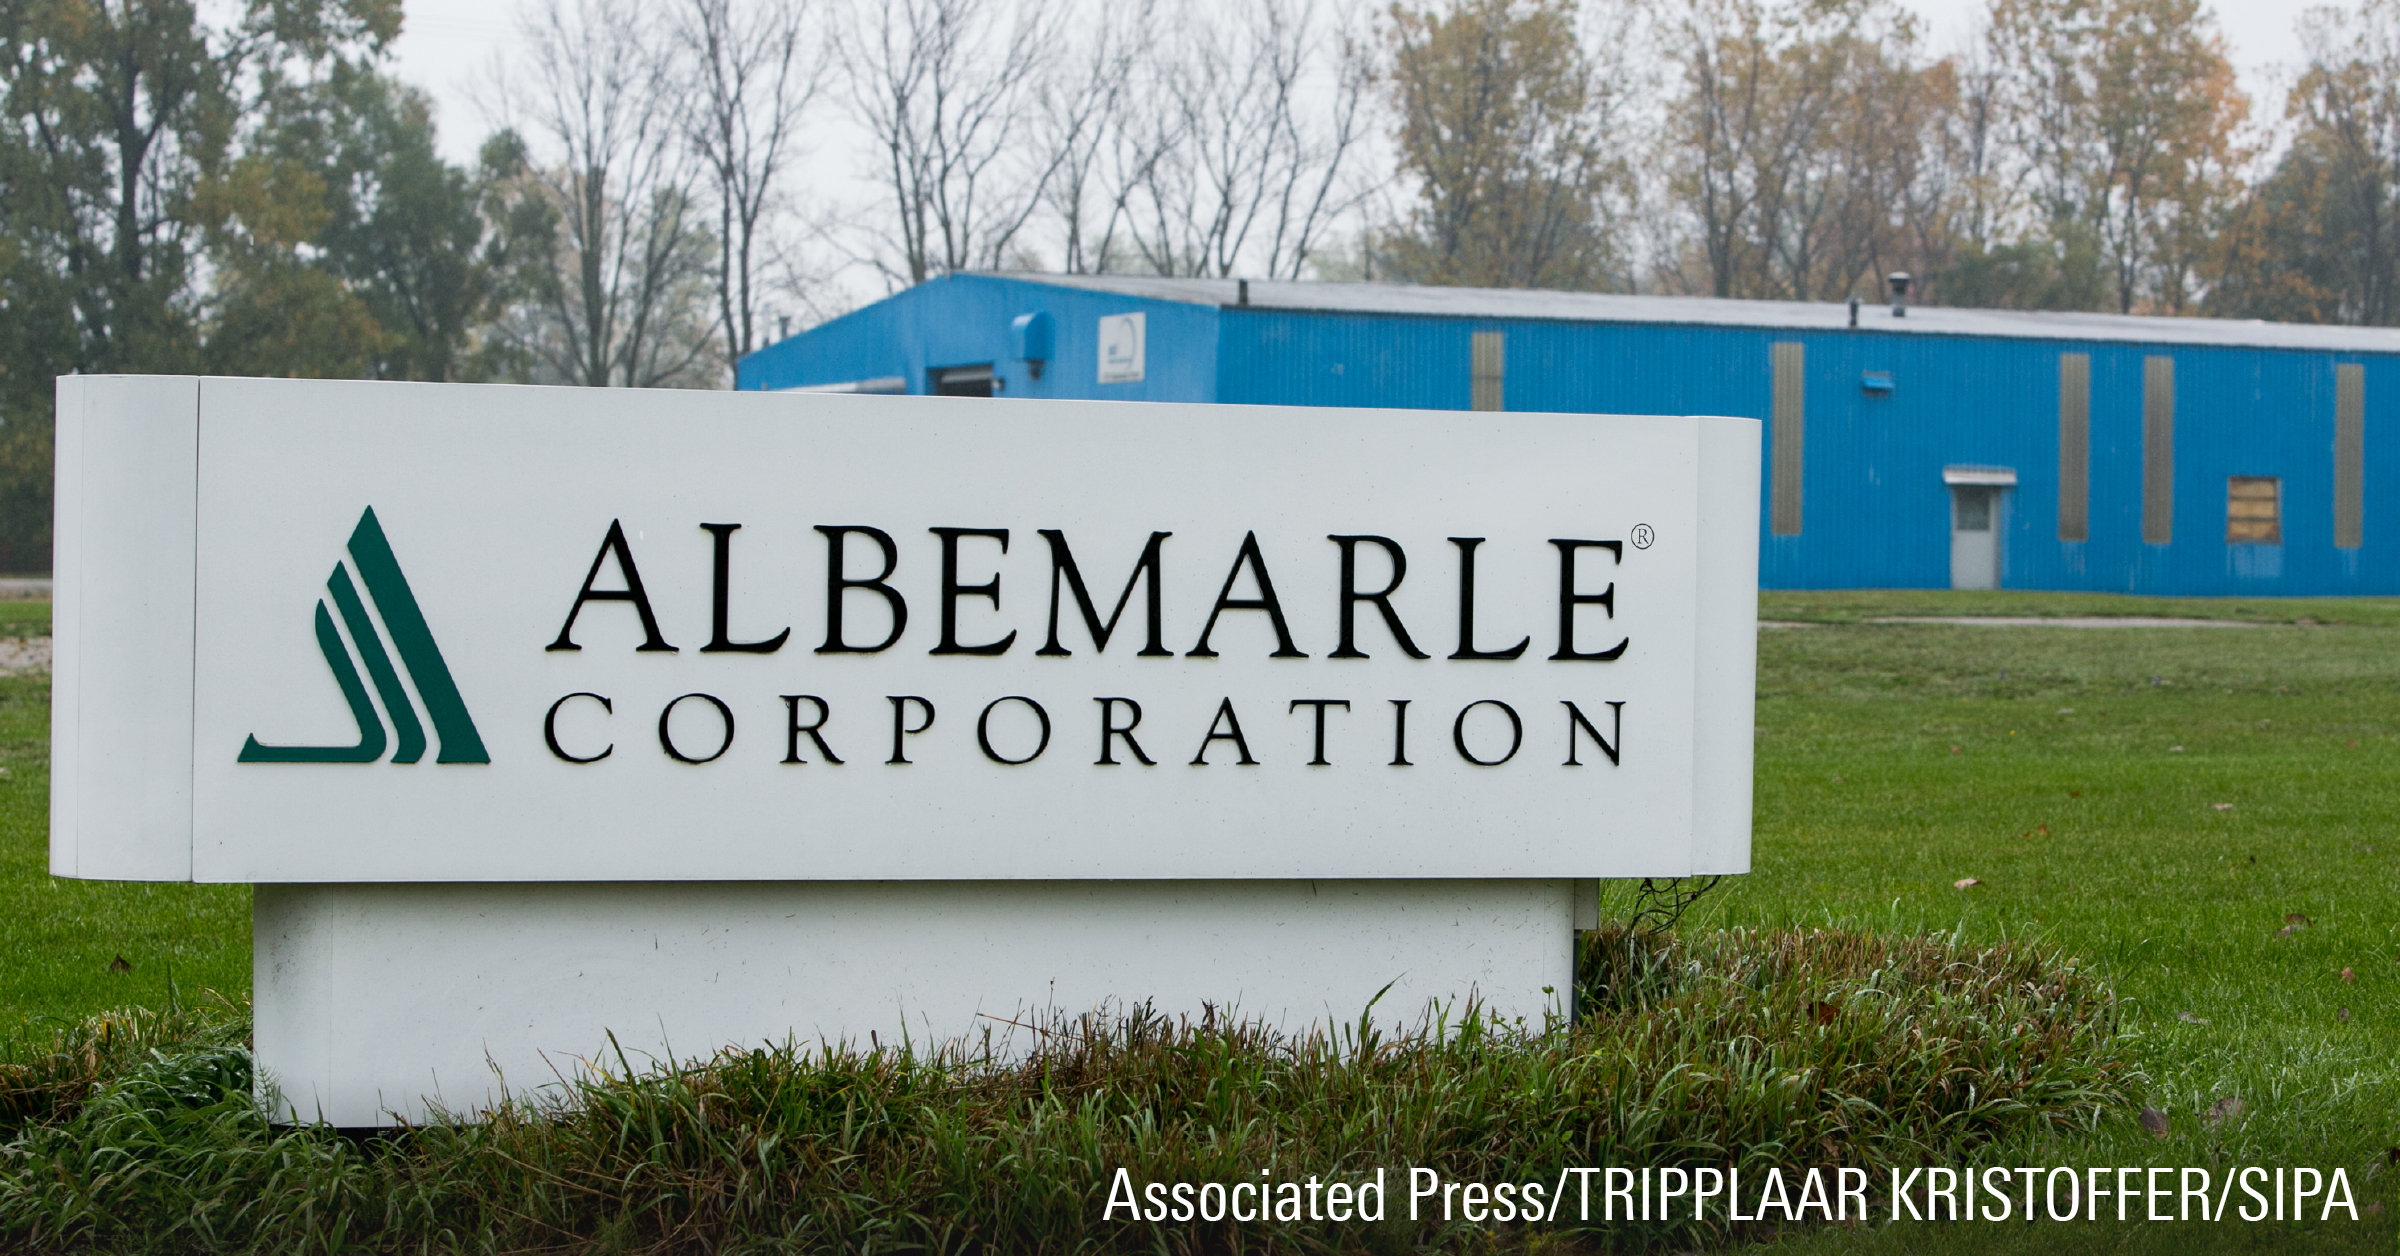 A logo sign outside of a facility occupied by the Albemarle Corporation.